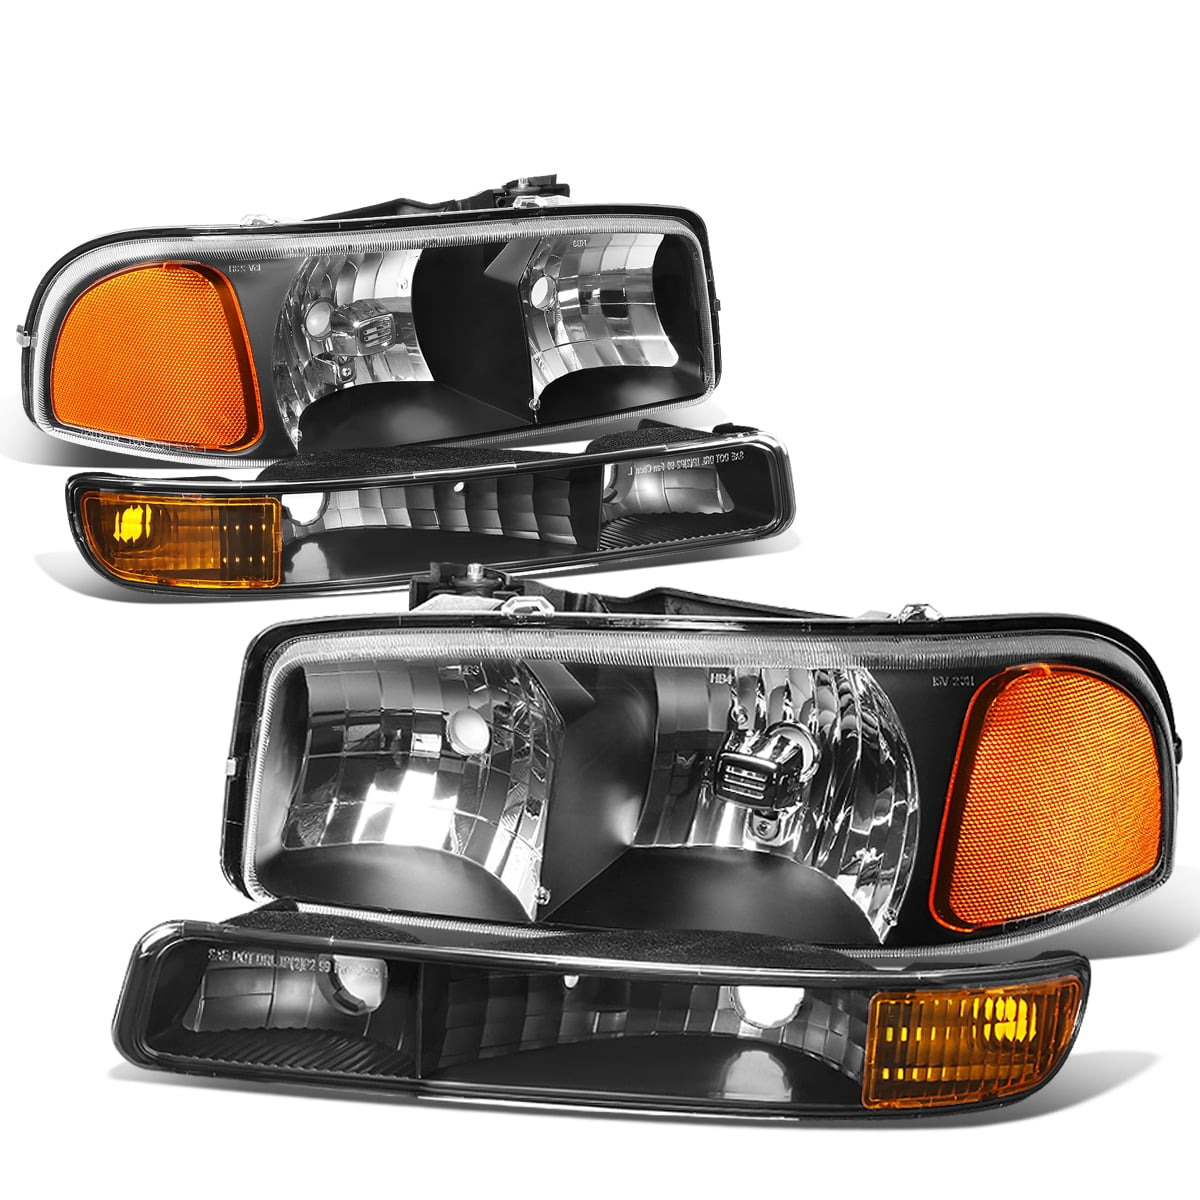 LED DRL Headlights with Bumper Lamps Compatible with GMC Sierra Yukon XL GMT800 99-07 Black Housing Amber Corner Driver and Passenger Side 